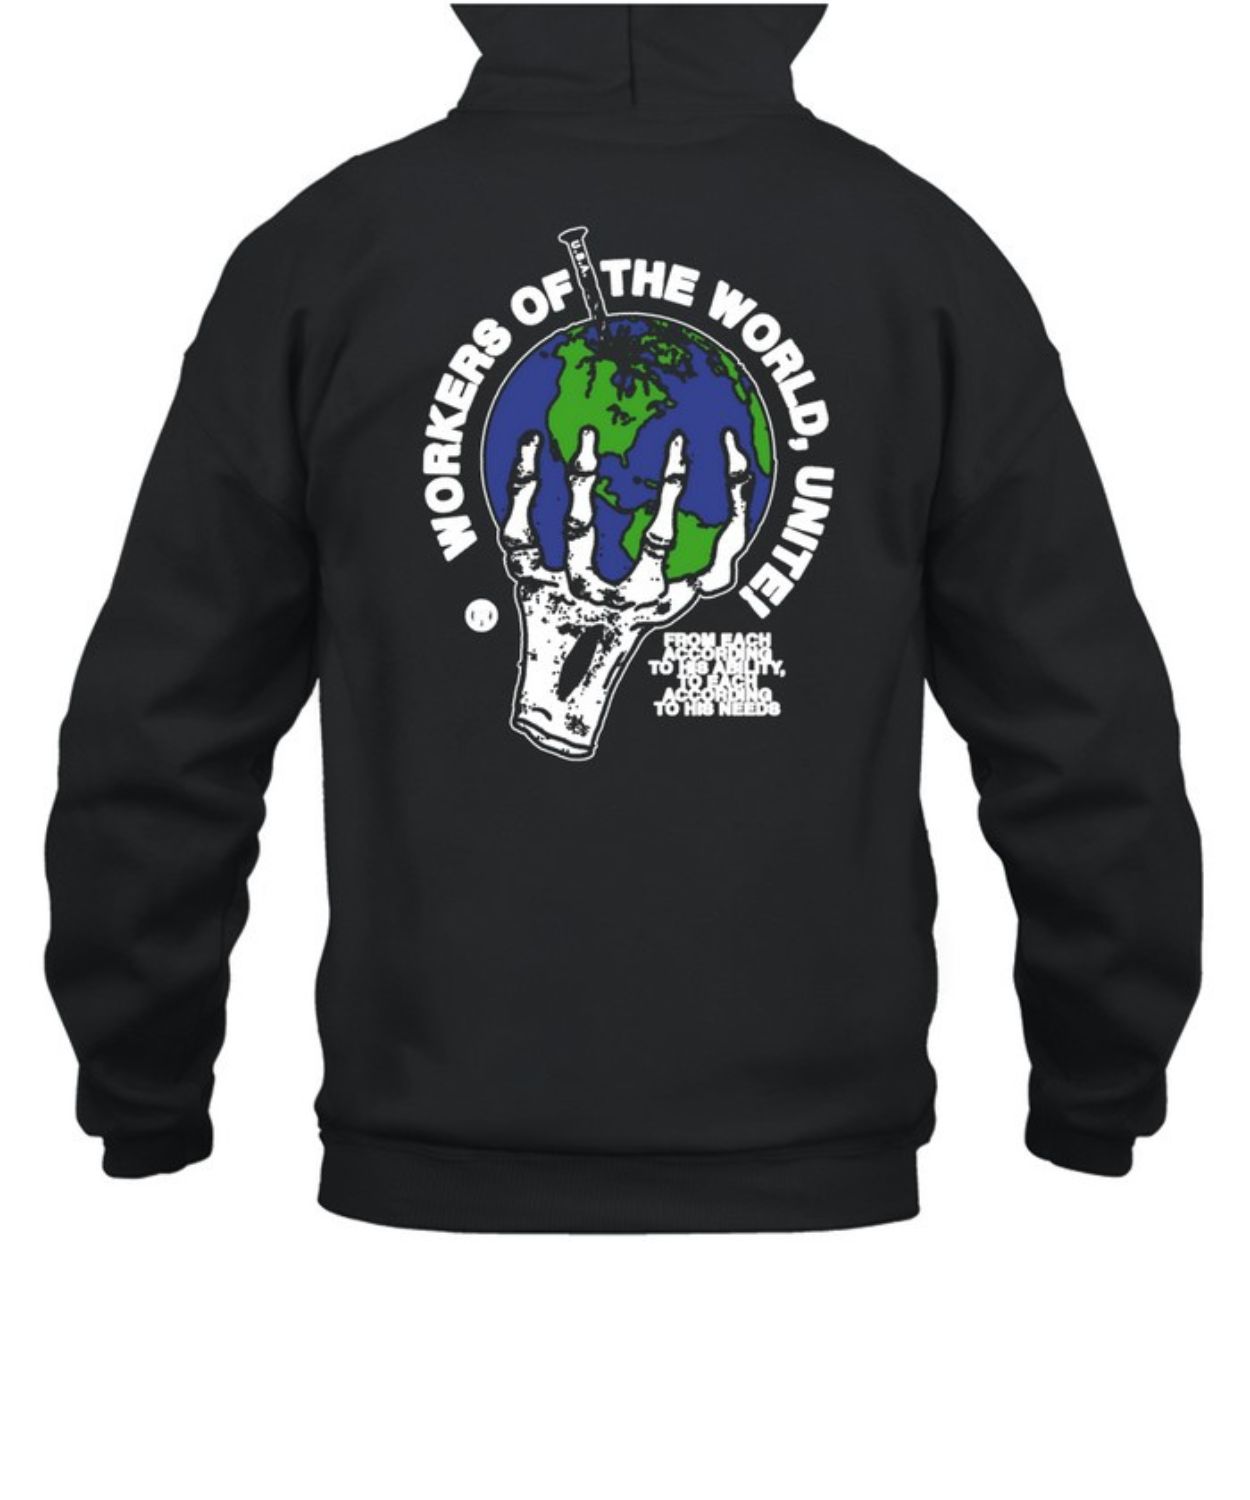 Ideologie Merch Workers Of The World Unite Hoodie